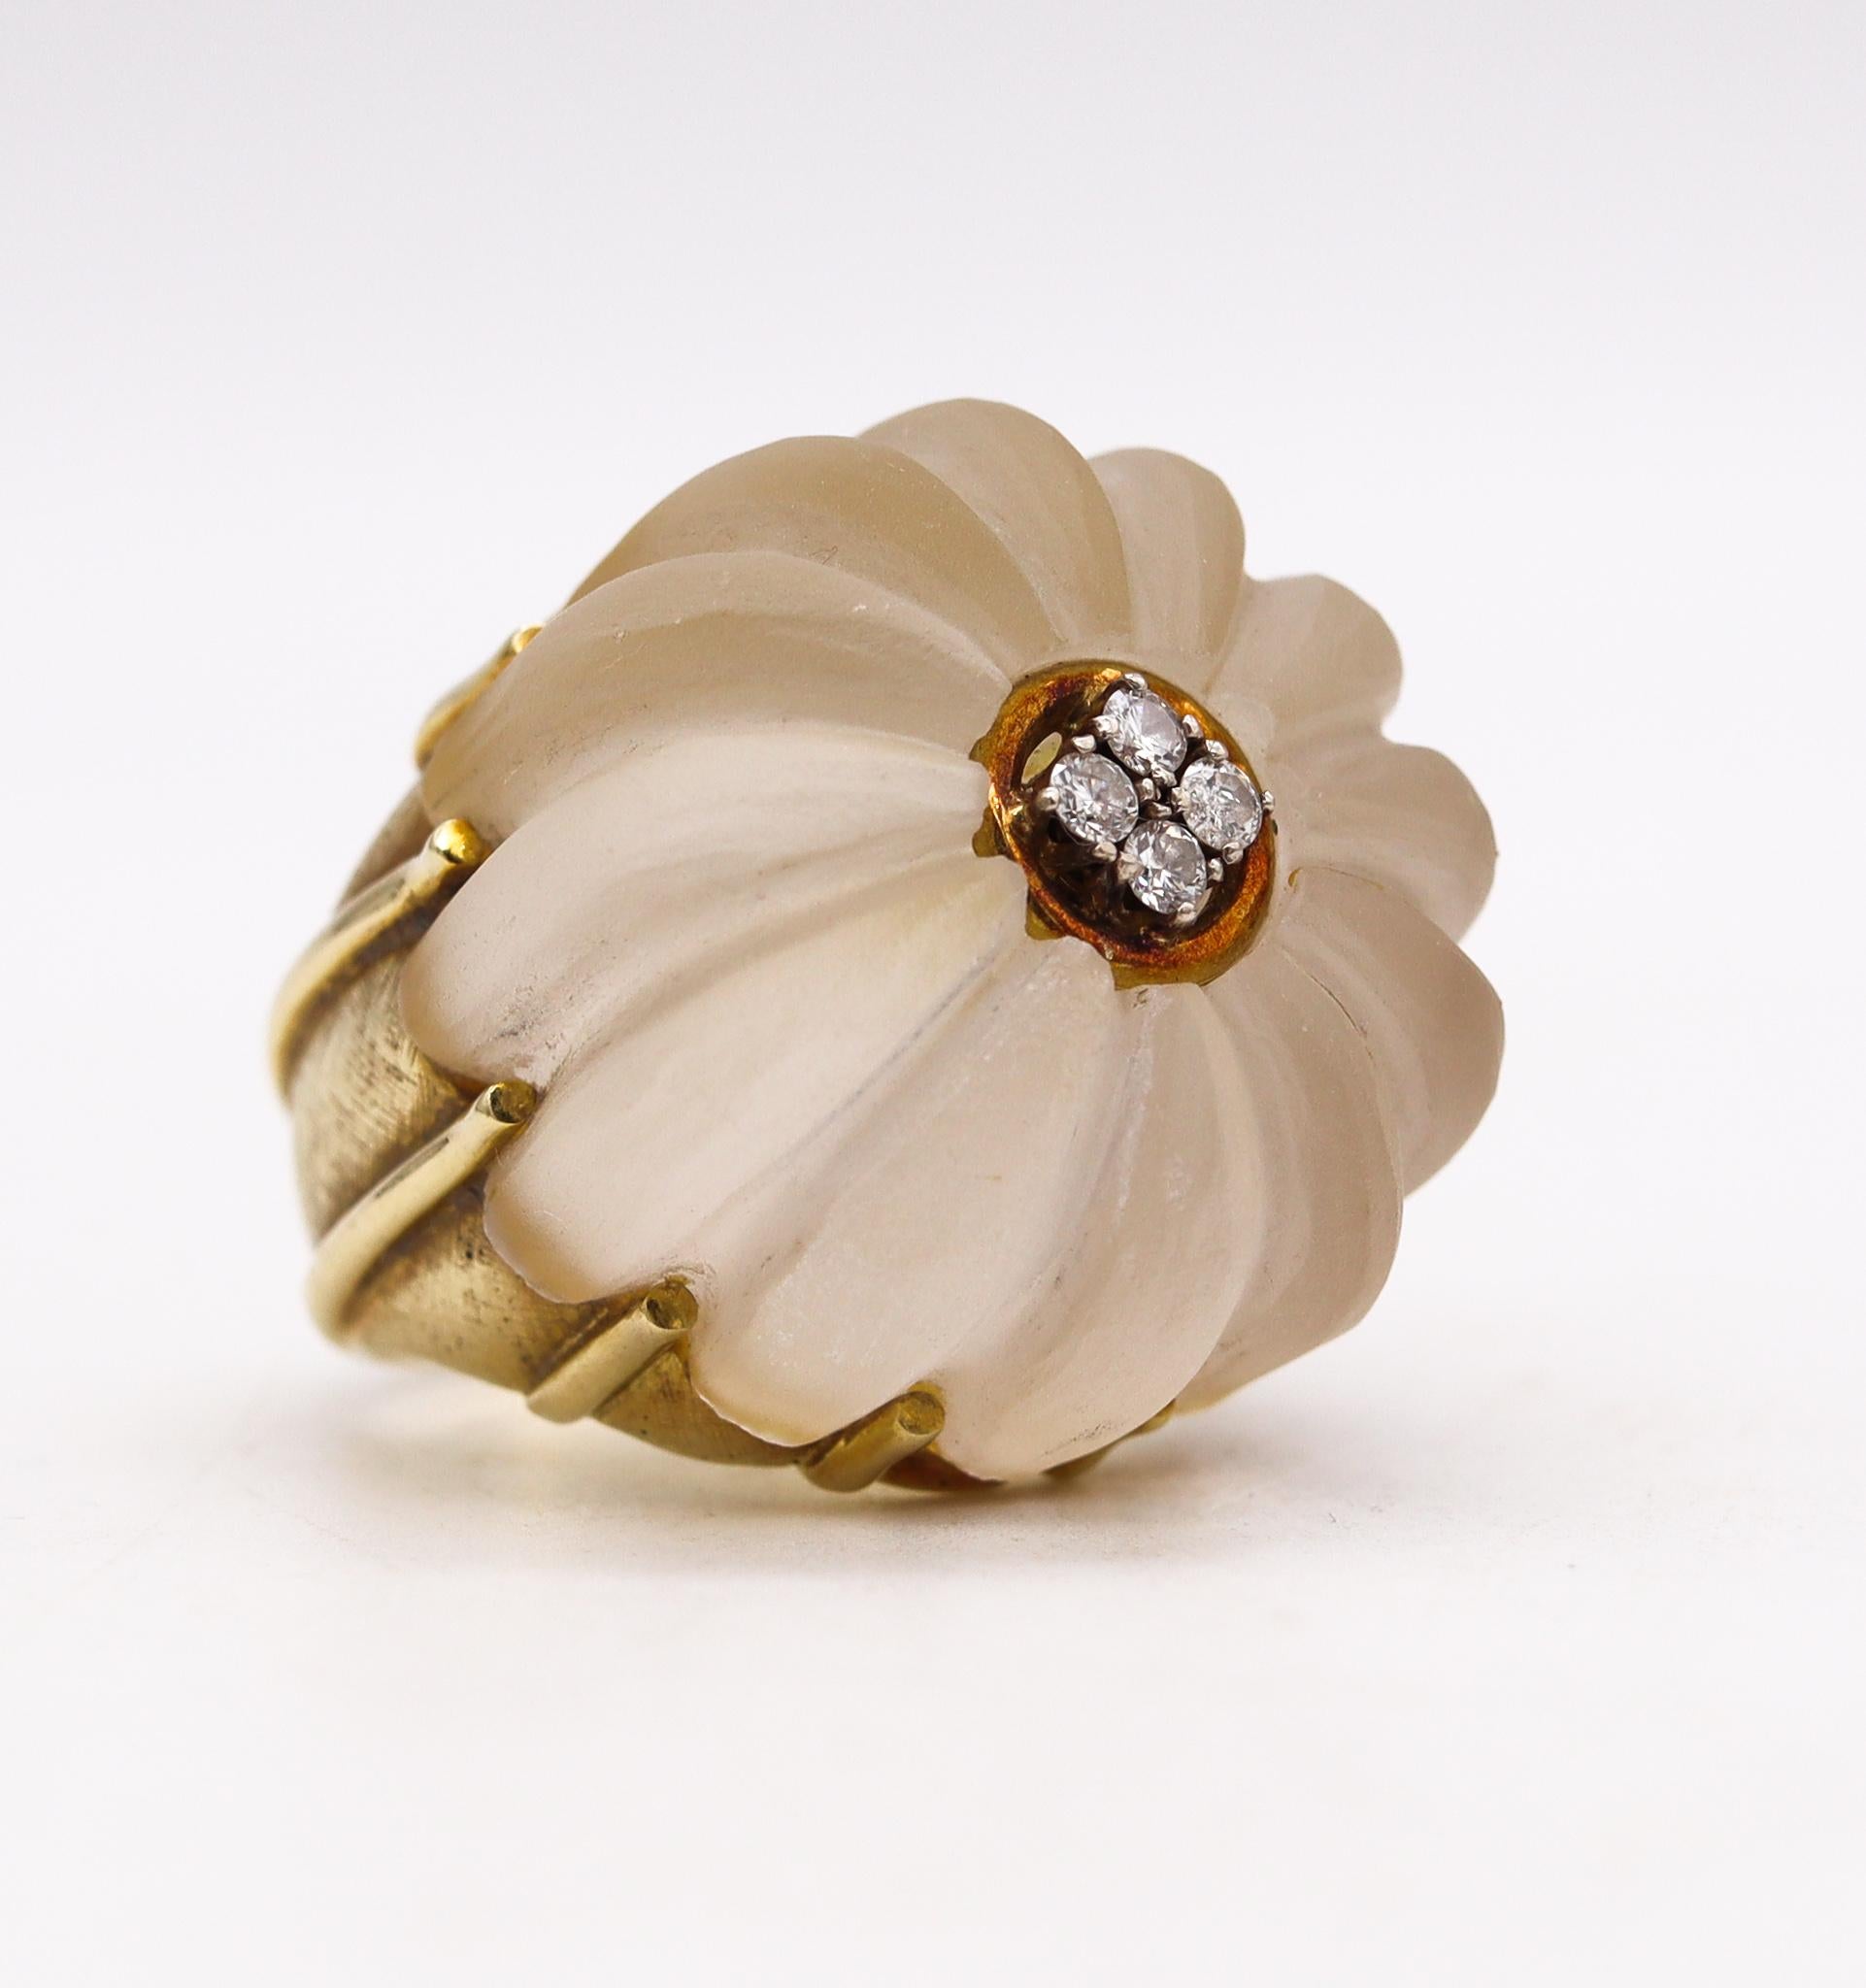 Modernist Modernism 1970 Cocktail Ring in 18Kt Yellow Gold with Rock Quartz & VS Diamonds For Sale